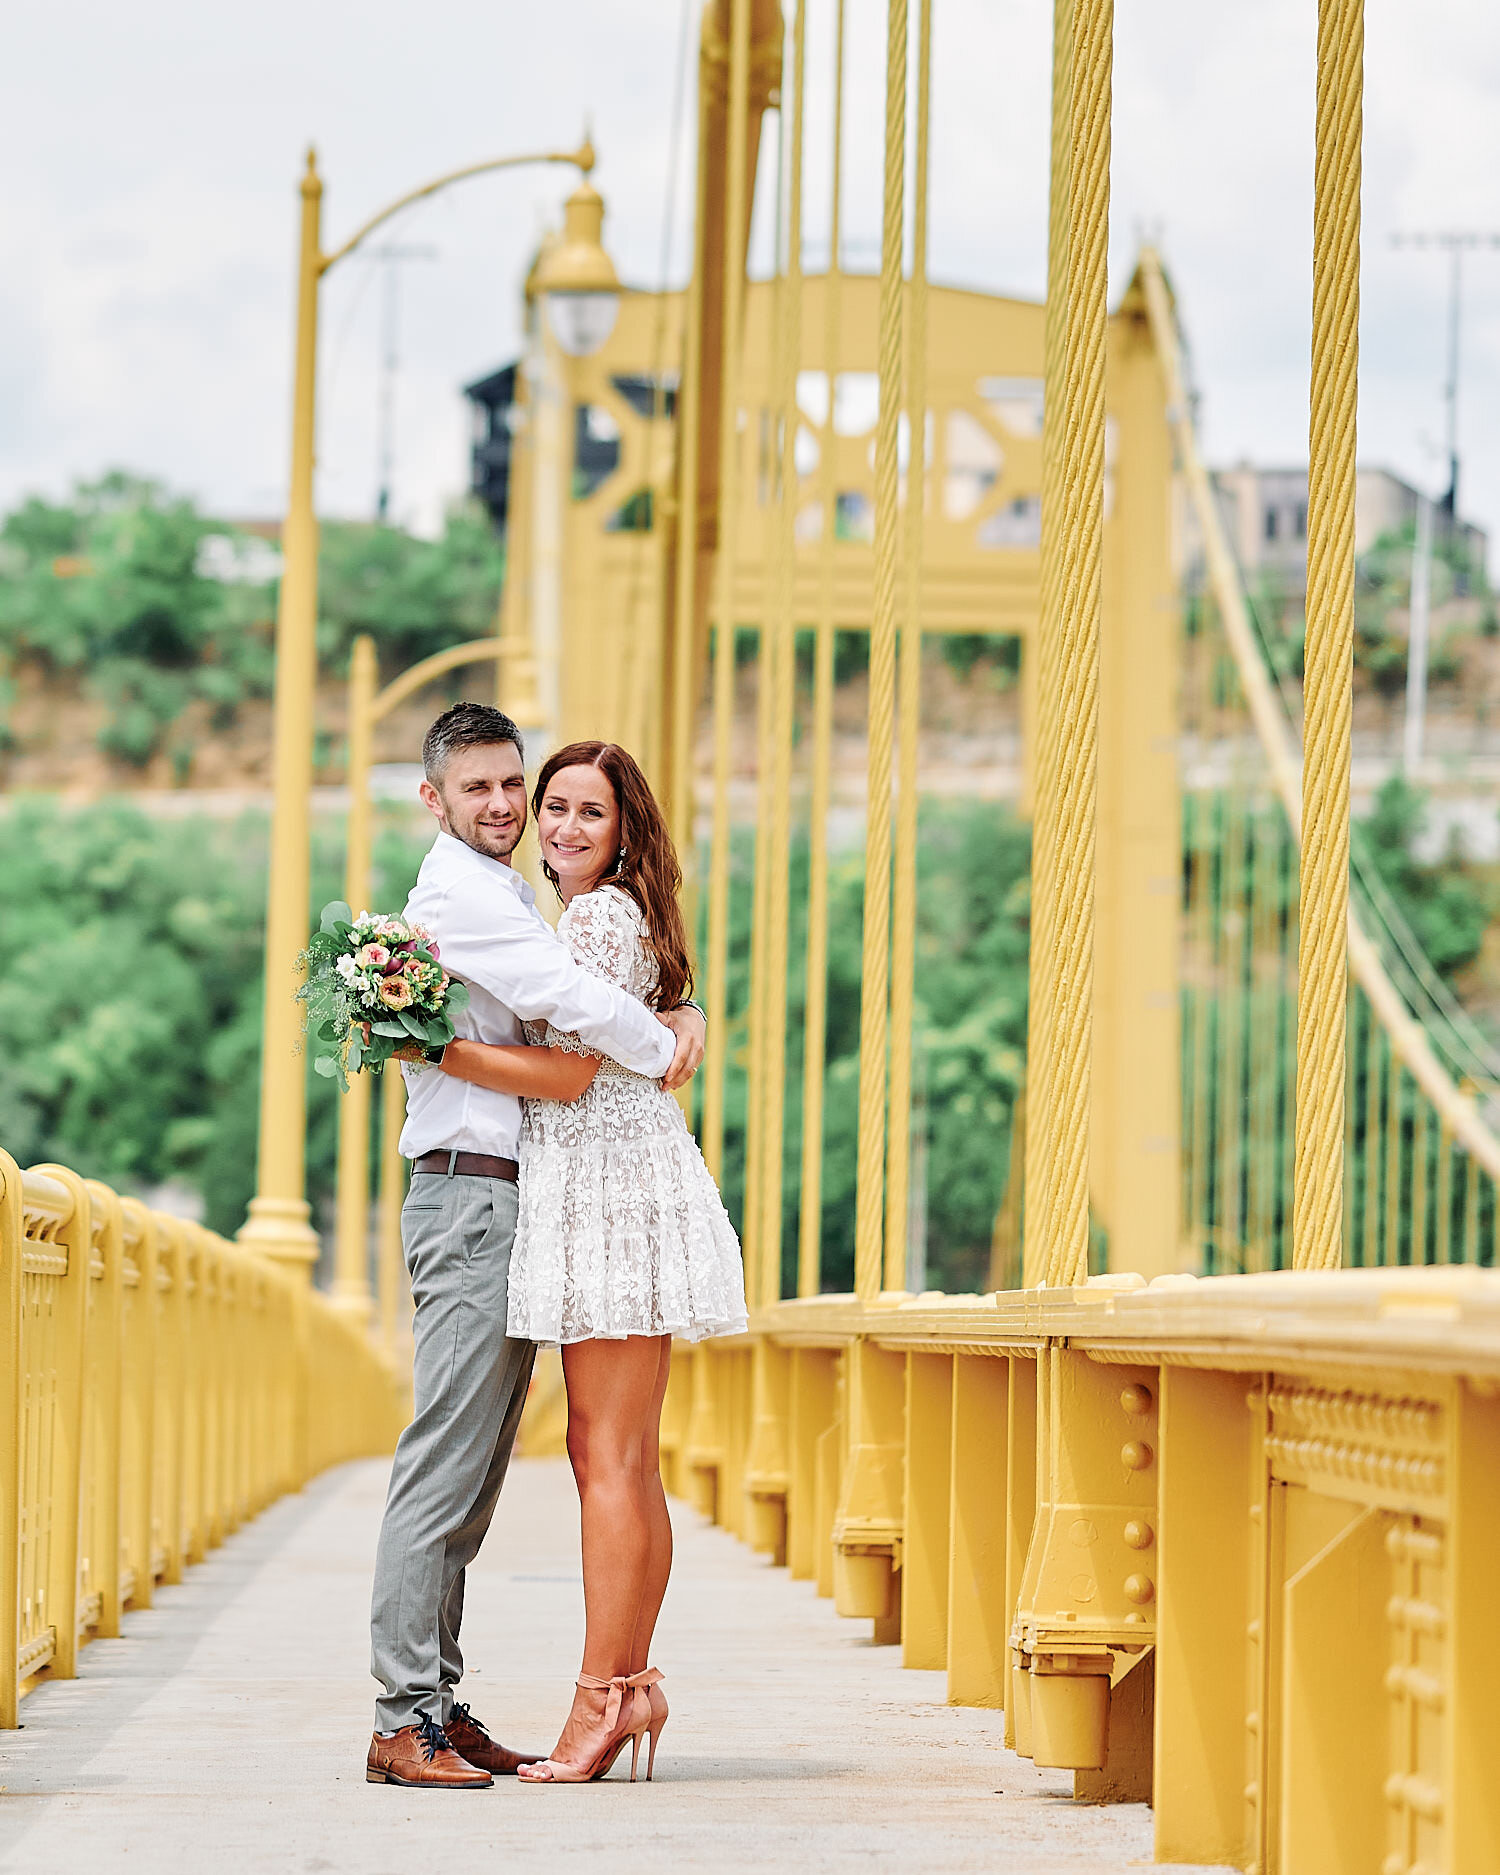  Olga Shuleika and Dzmitry Hryher are tying the knot on a hot summer day in a private ceremony in Pittsburgh city magistrate. The girl looks beautiful in small white lace dress and she is pregnant. 